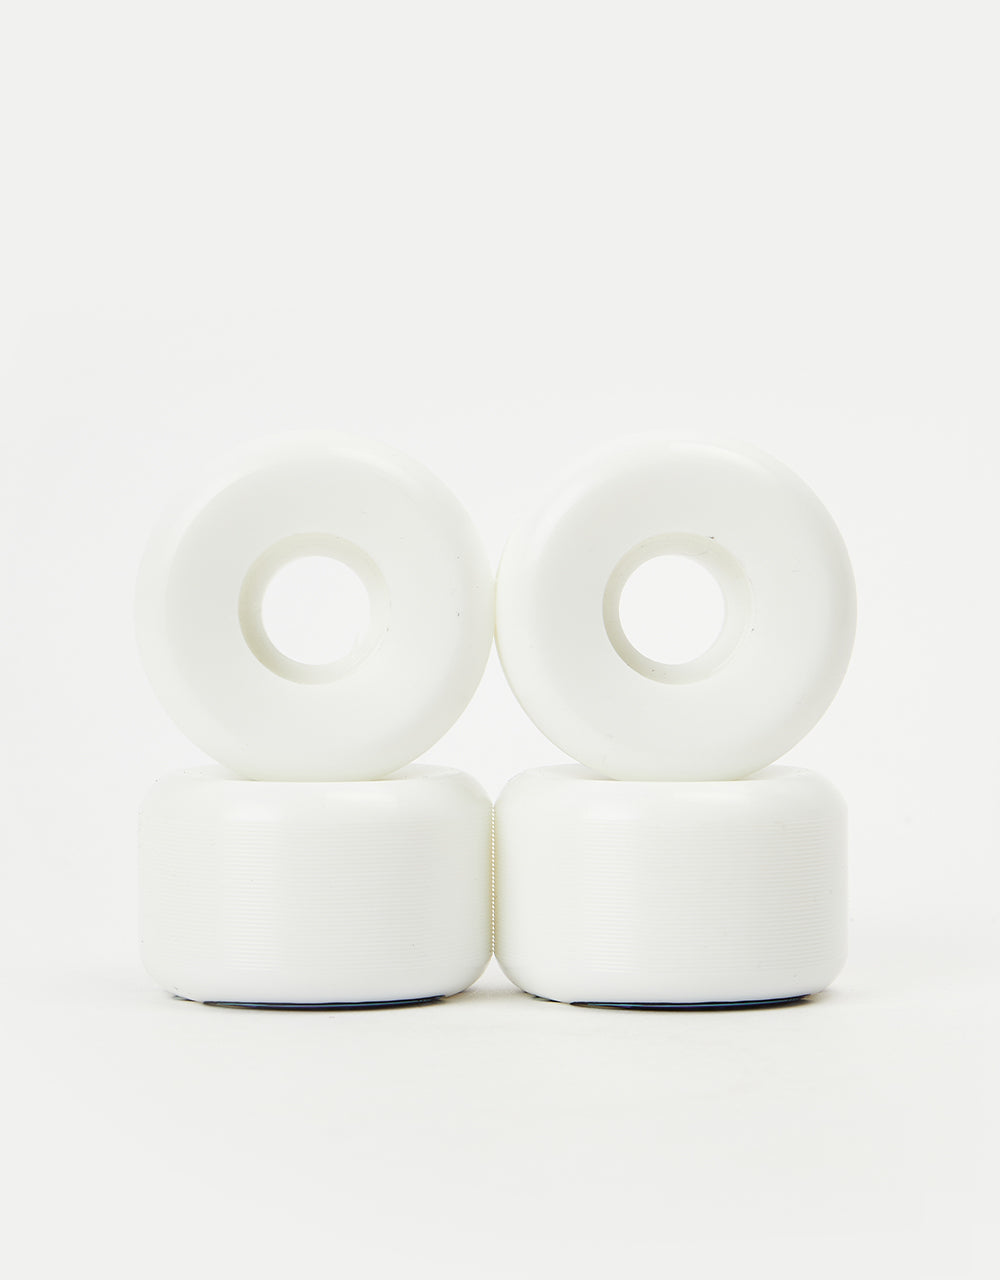 Orbs Specters Whites Conical 99a Skateboard Wheel - 52mm